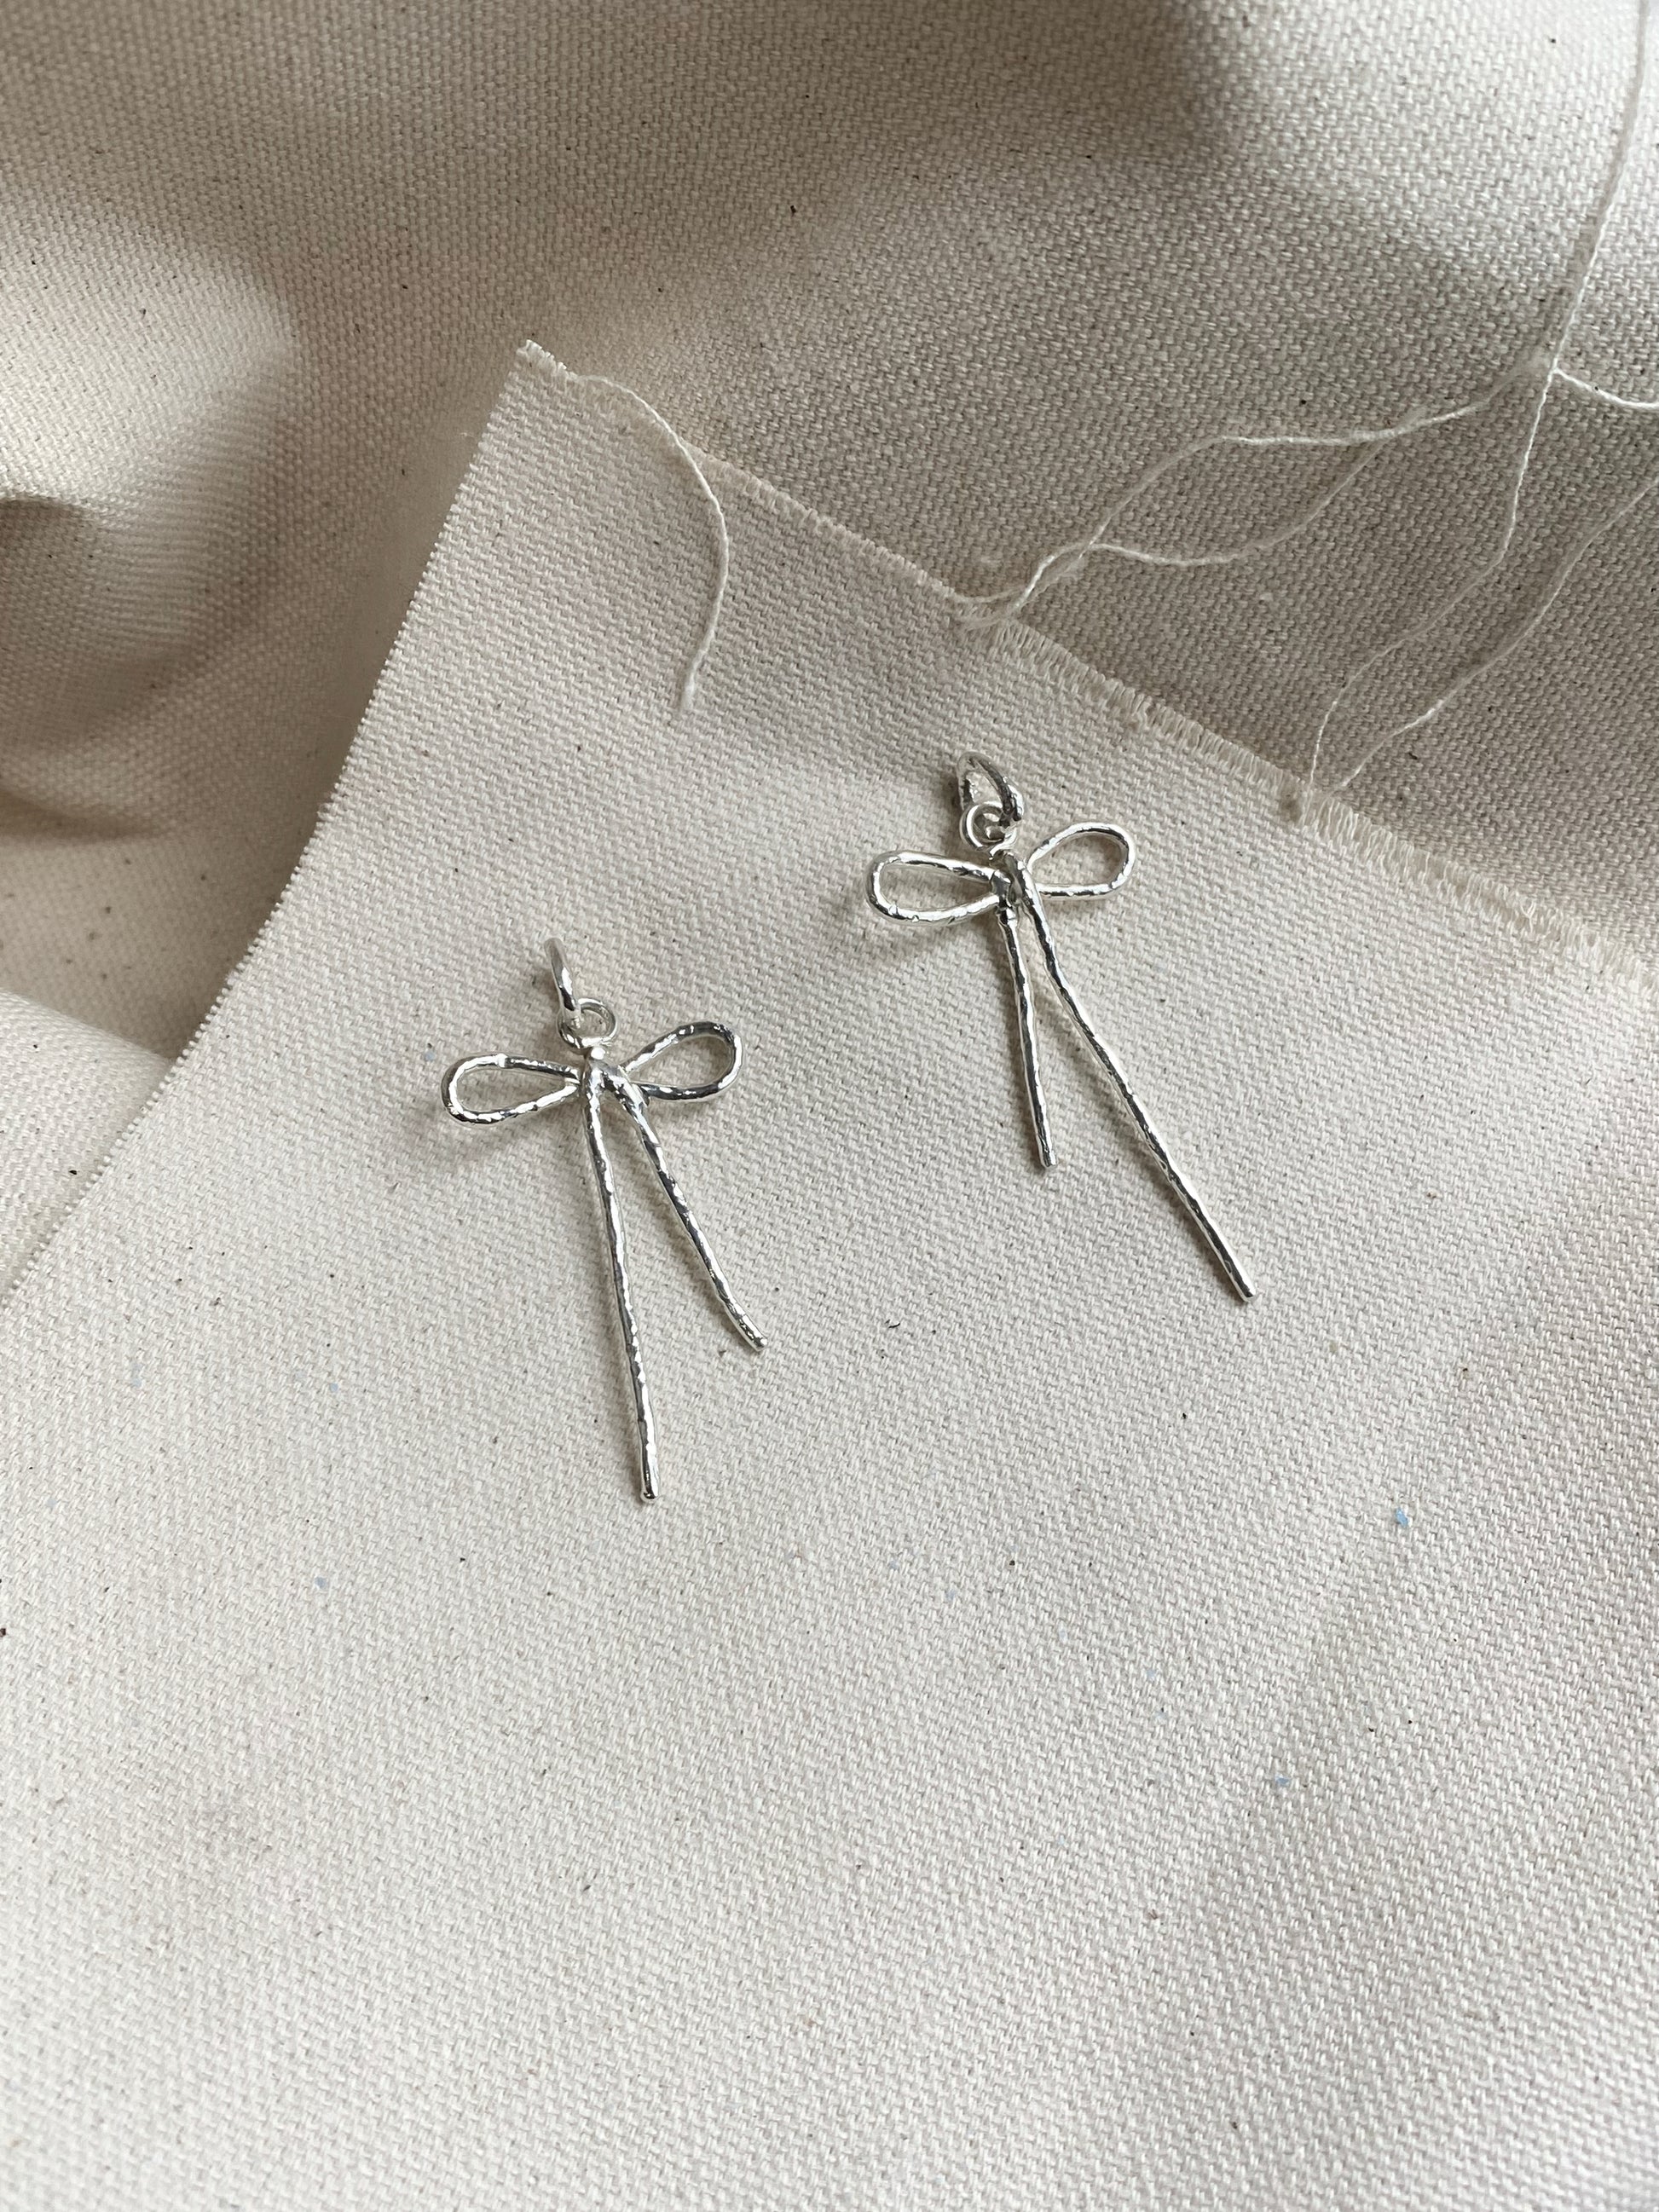 Sterling silver bow earrings laying on canvas